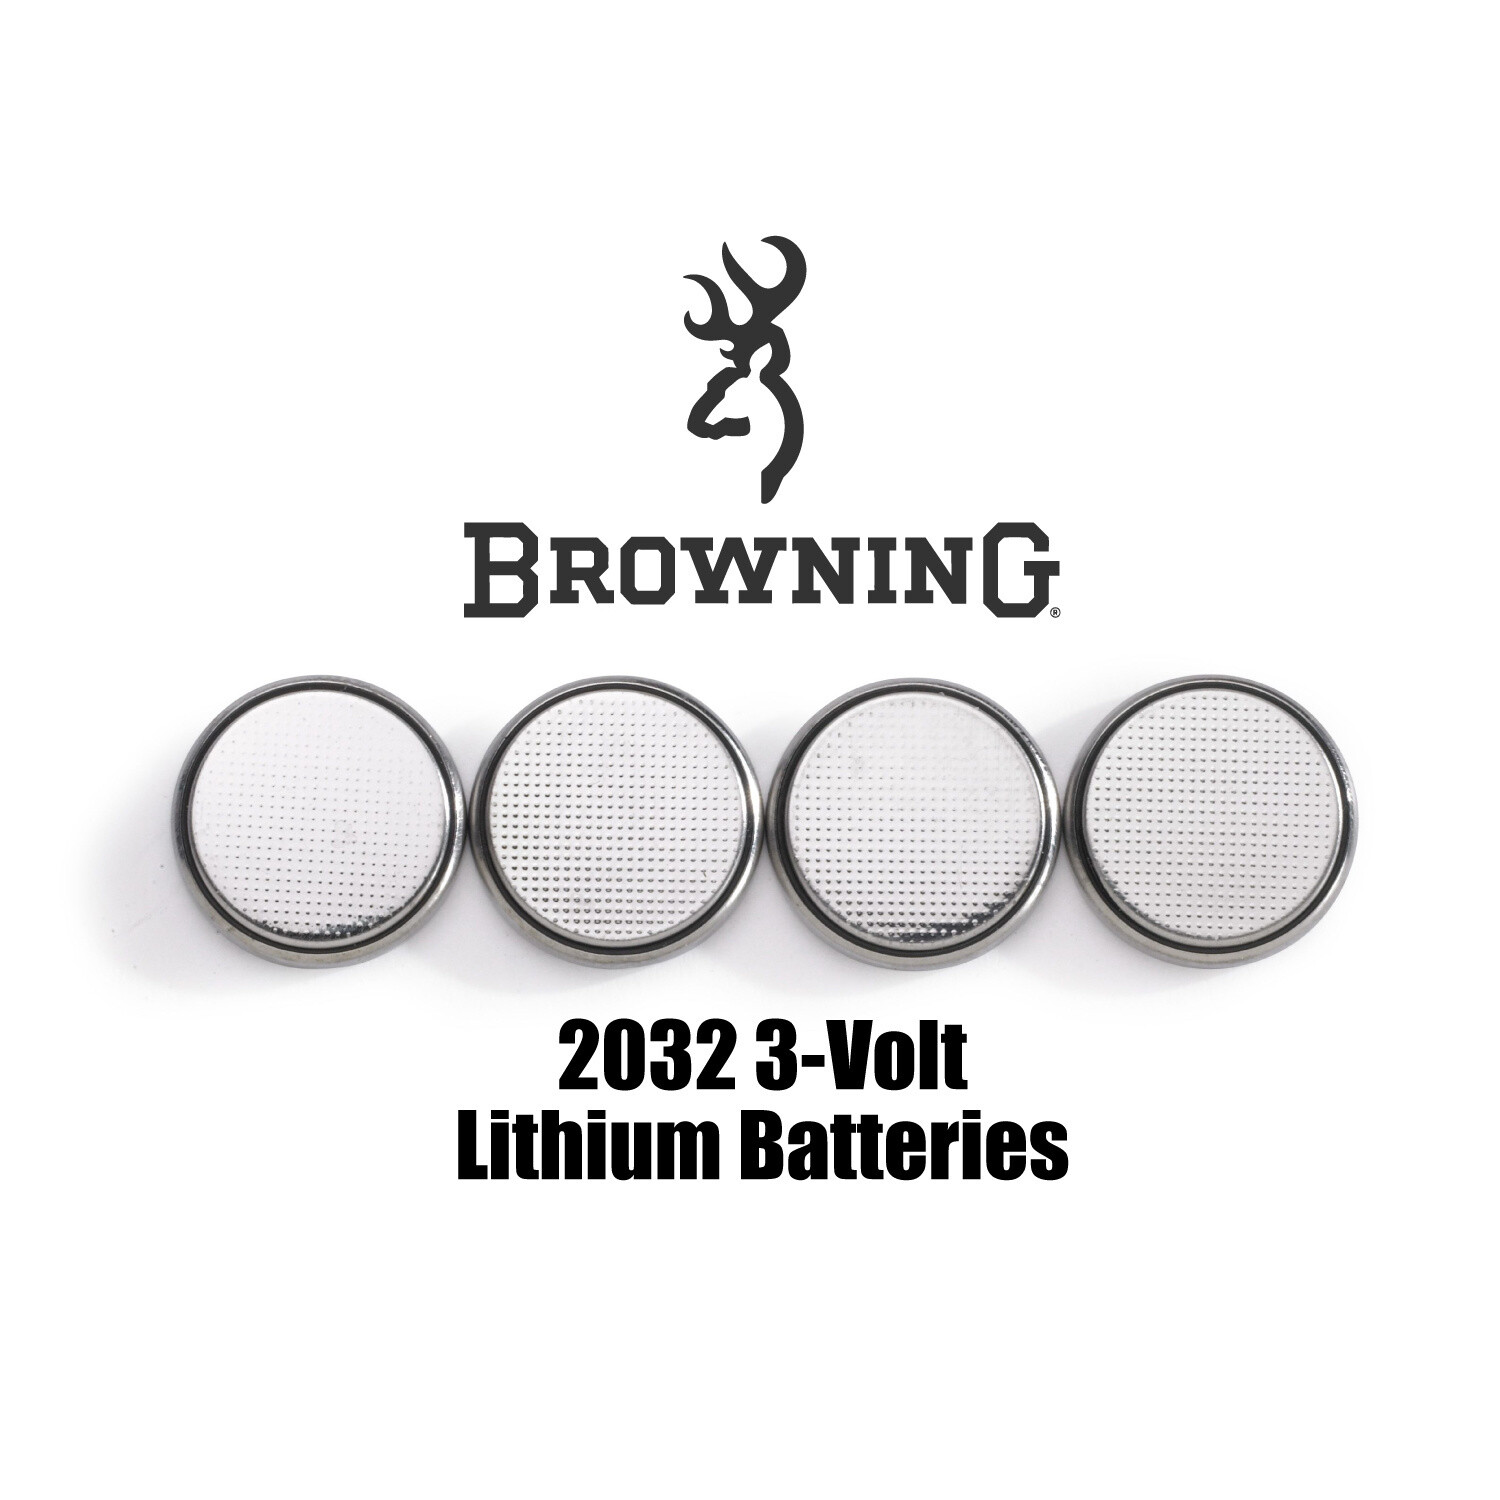 Browning 2032 3-Volt Lithium Batteries (4-Pack)